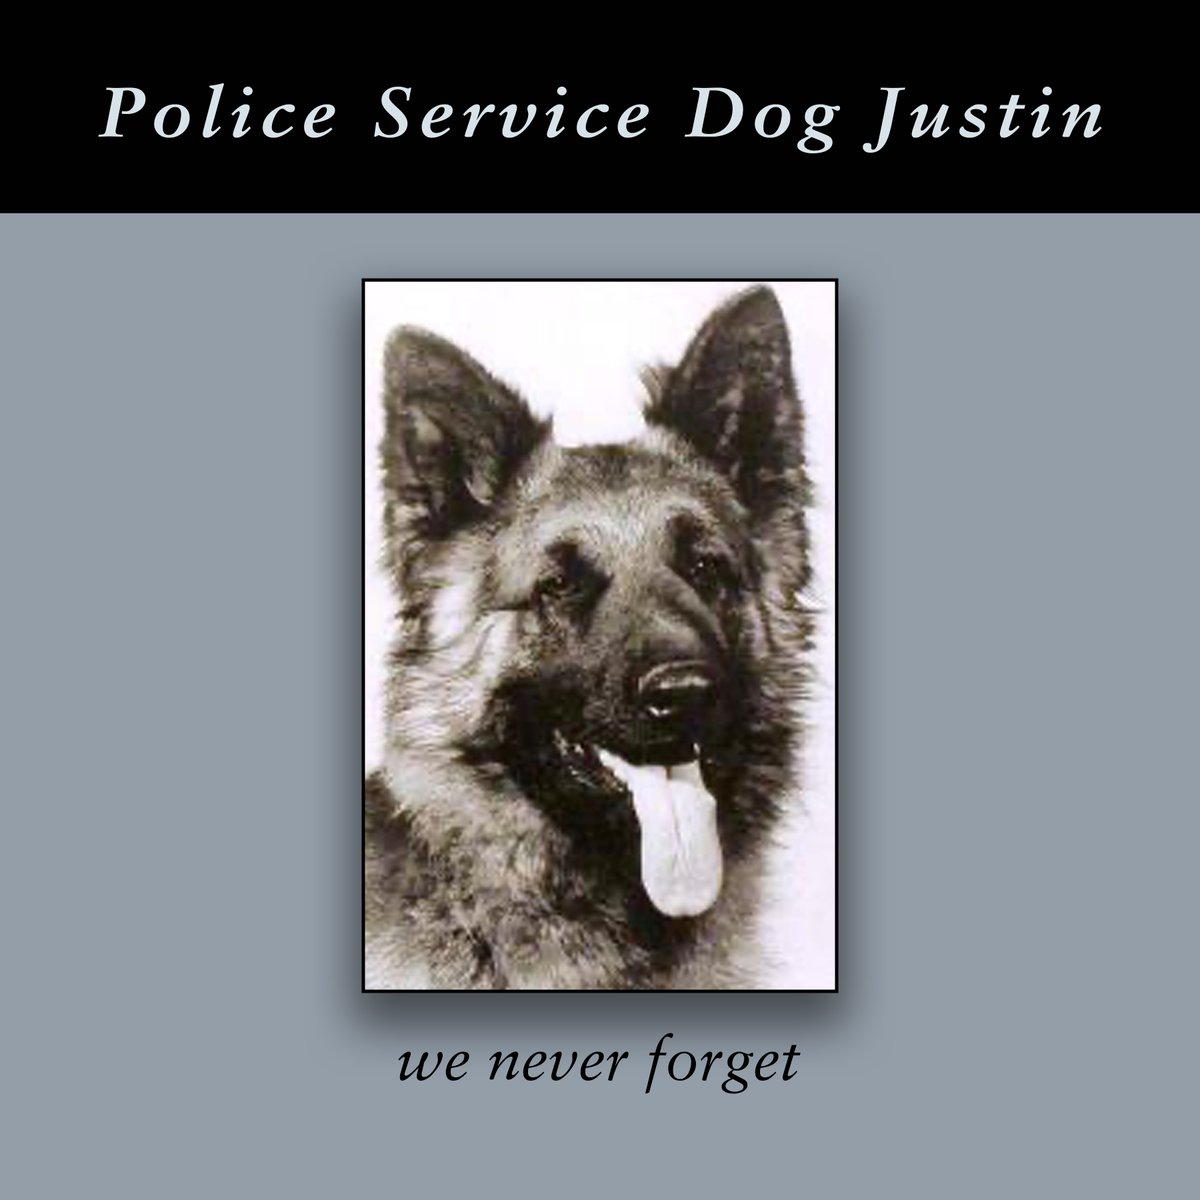 We #NeverForget #VPD Police Service Dog 'Justin' who was stabbed & killed 48 yrs ago today while apprehending an armed suspect with his partner Cst. Gary Foster (who was also stabbed) - they were responding to a gun call at 2nd & Garden #EastVan @VancouverPD #PoliceK9 @VPDCanine